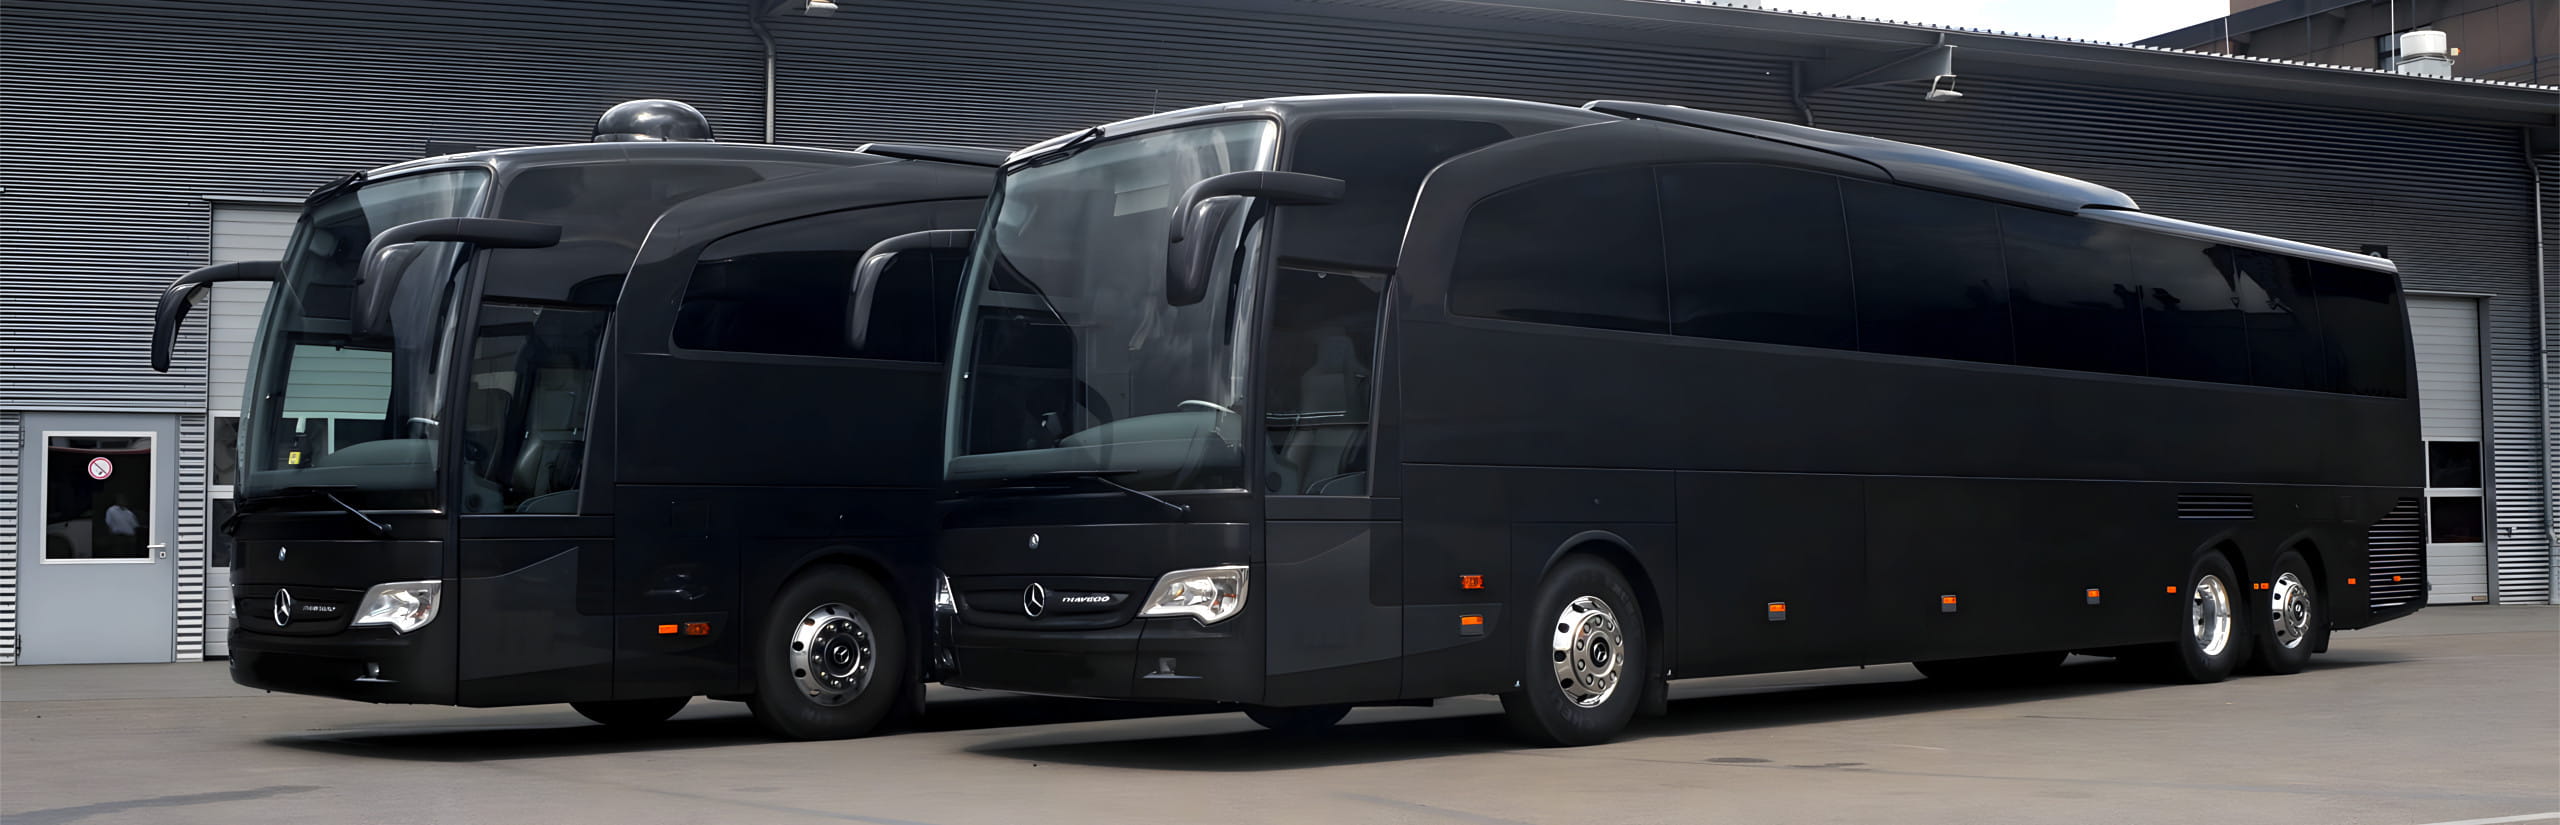 Luxury buses – VIP buses, VIP liners for rent